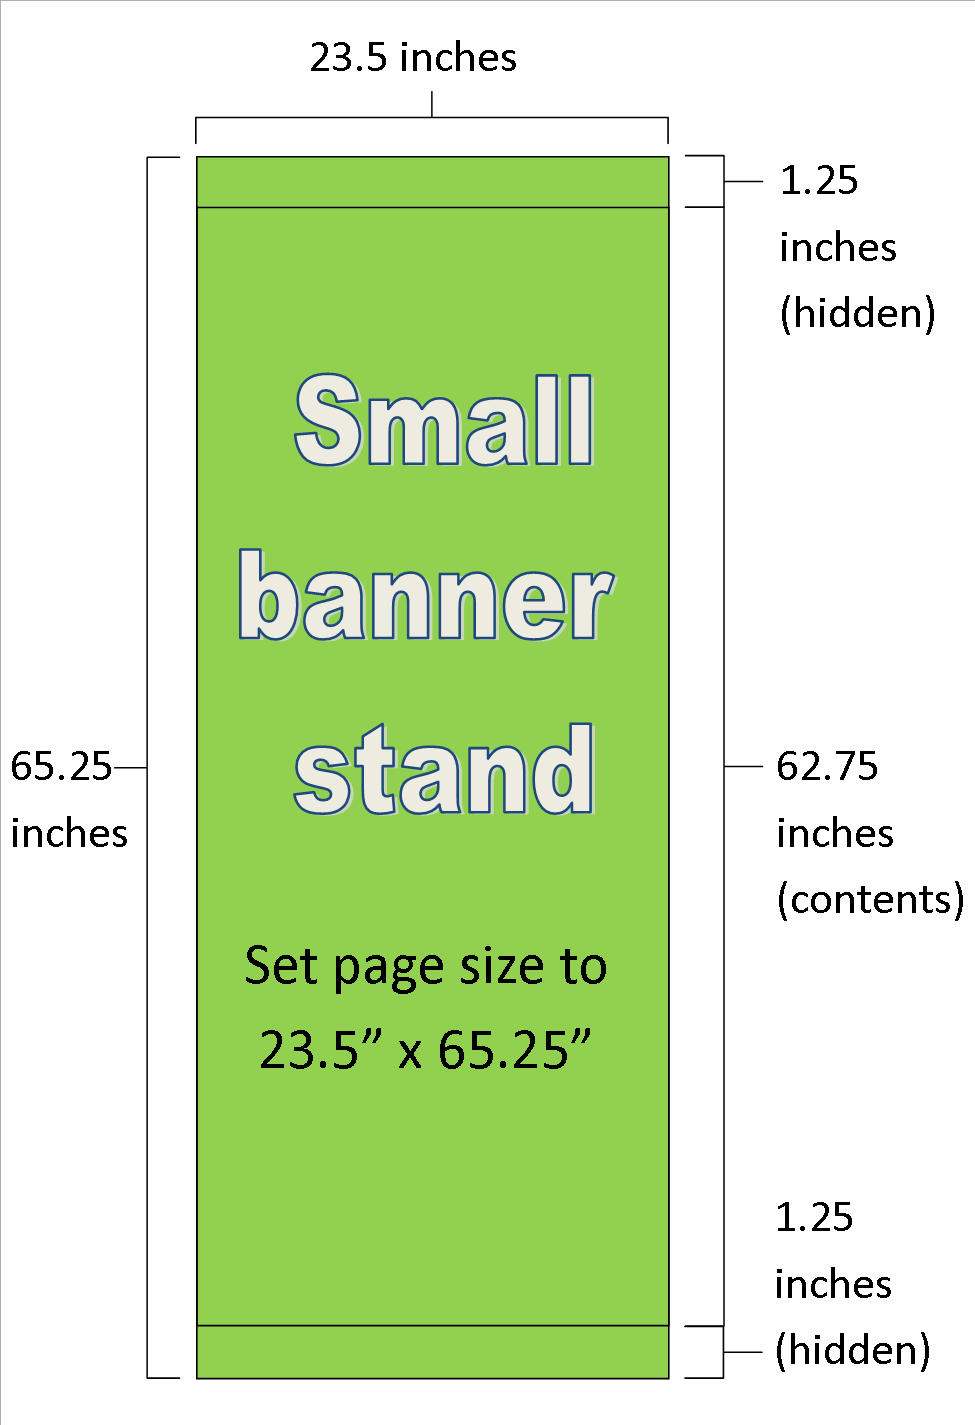 lolo techie Roll up banner stand dimensions 